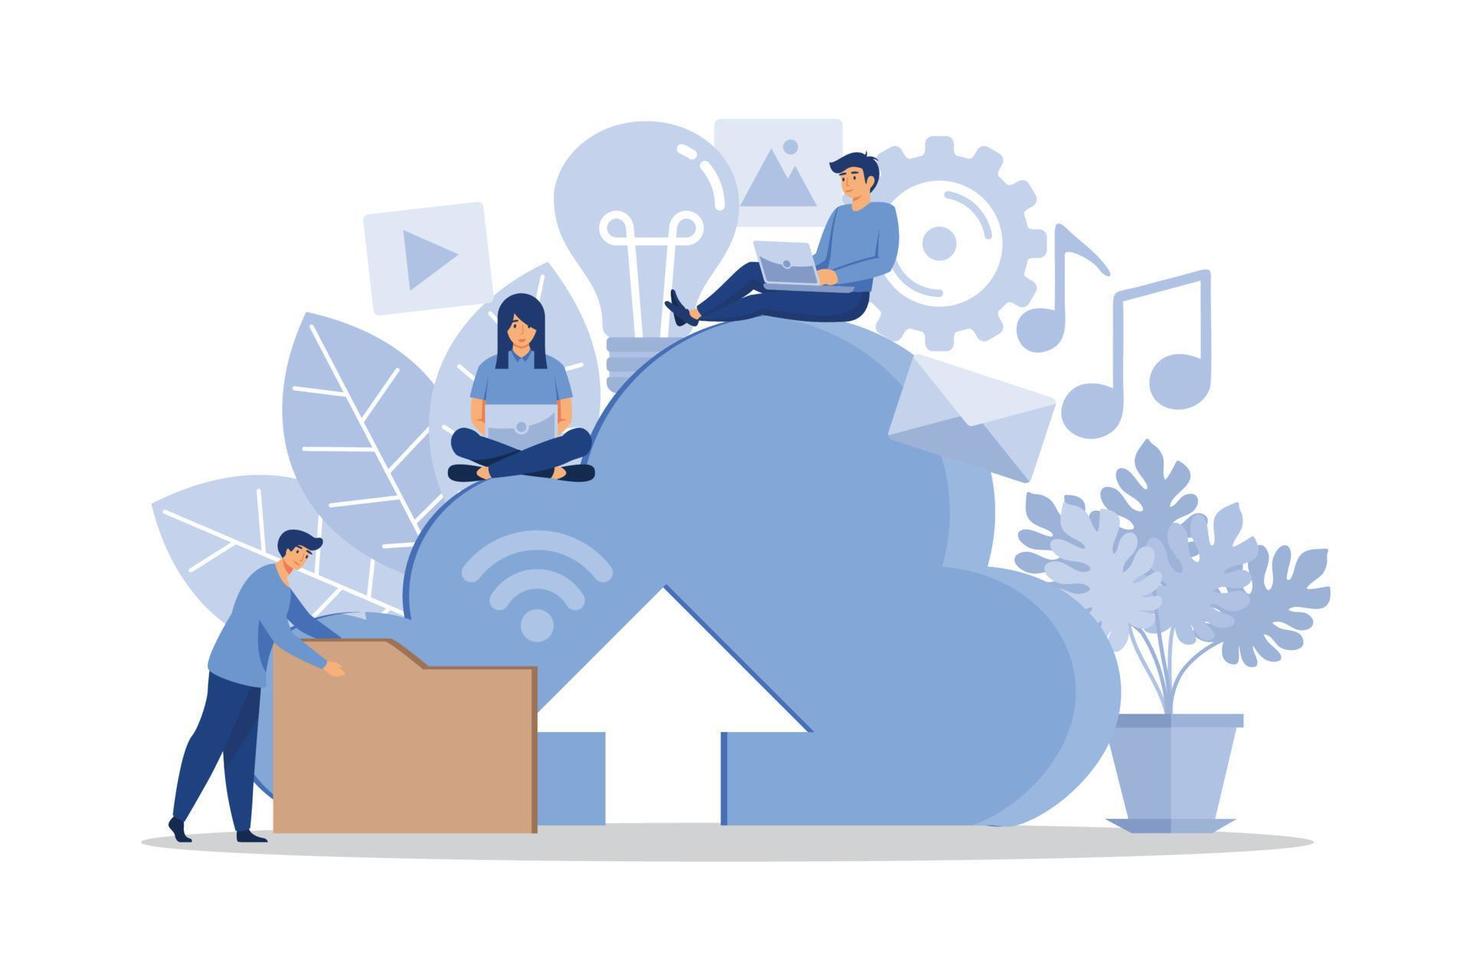 cloud data storage, online store on the network on the server, flat stylish graphics little people work with the cloud. flat design modern illustration vector